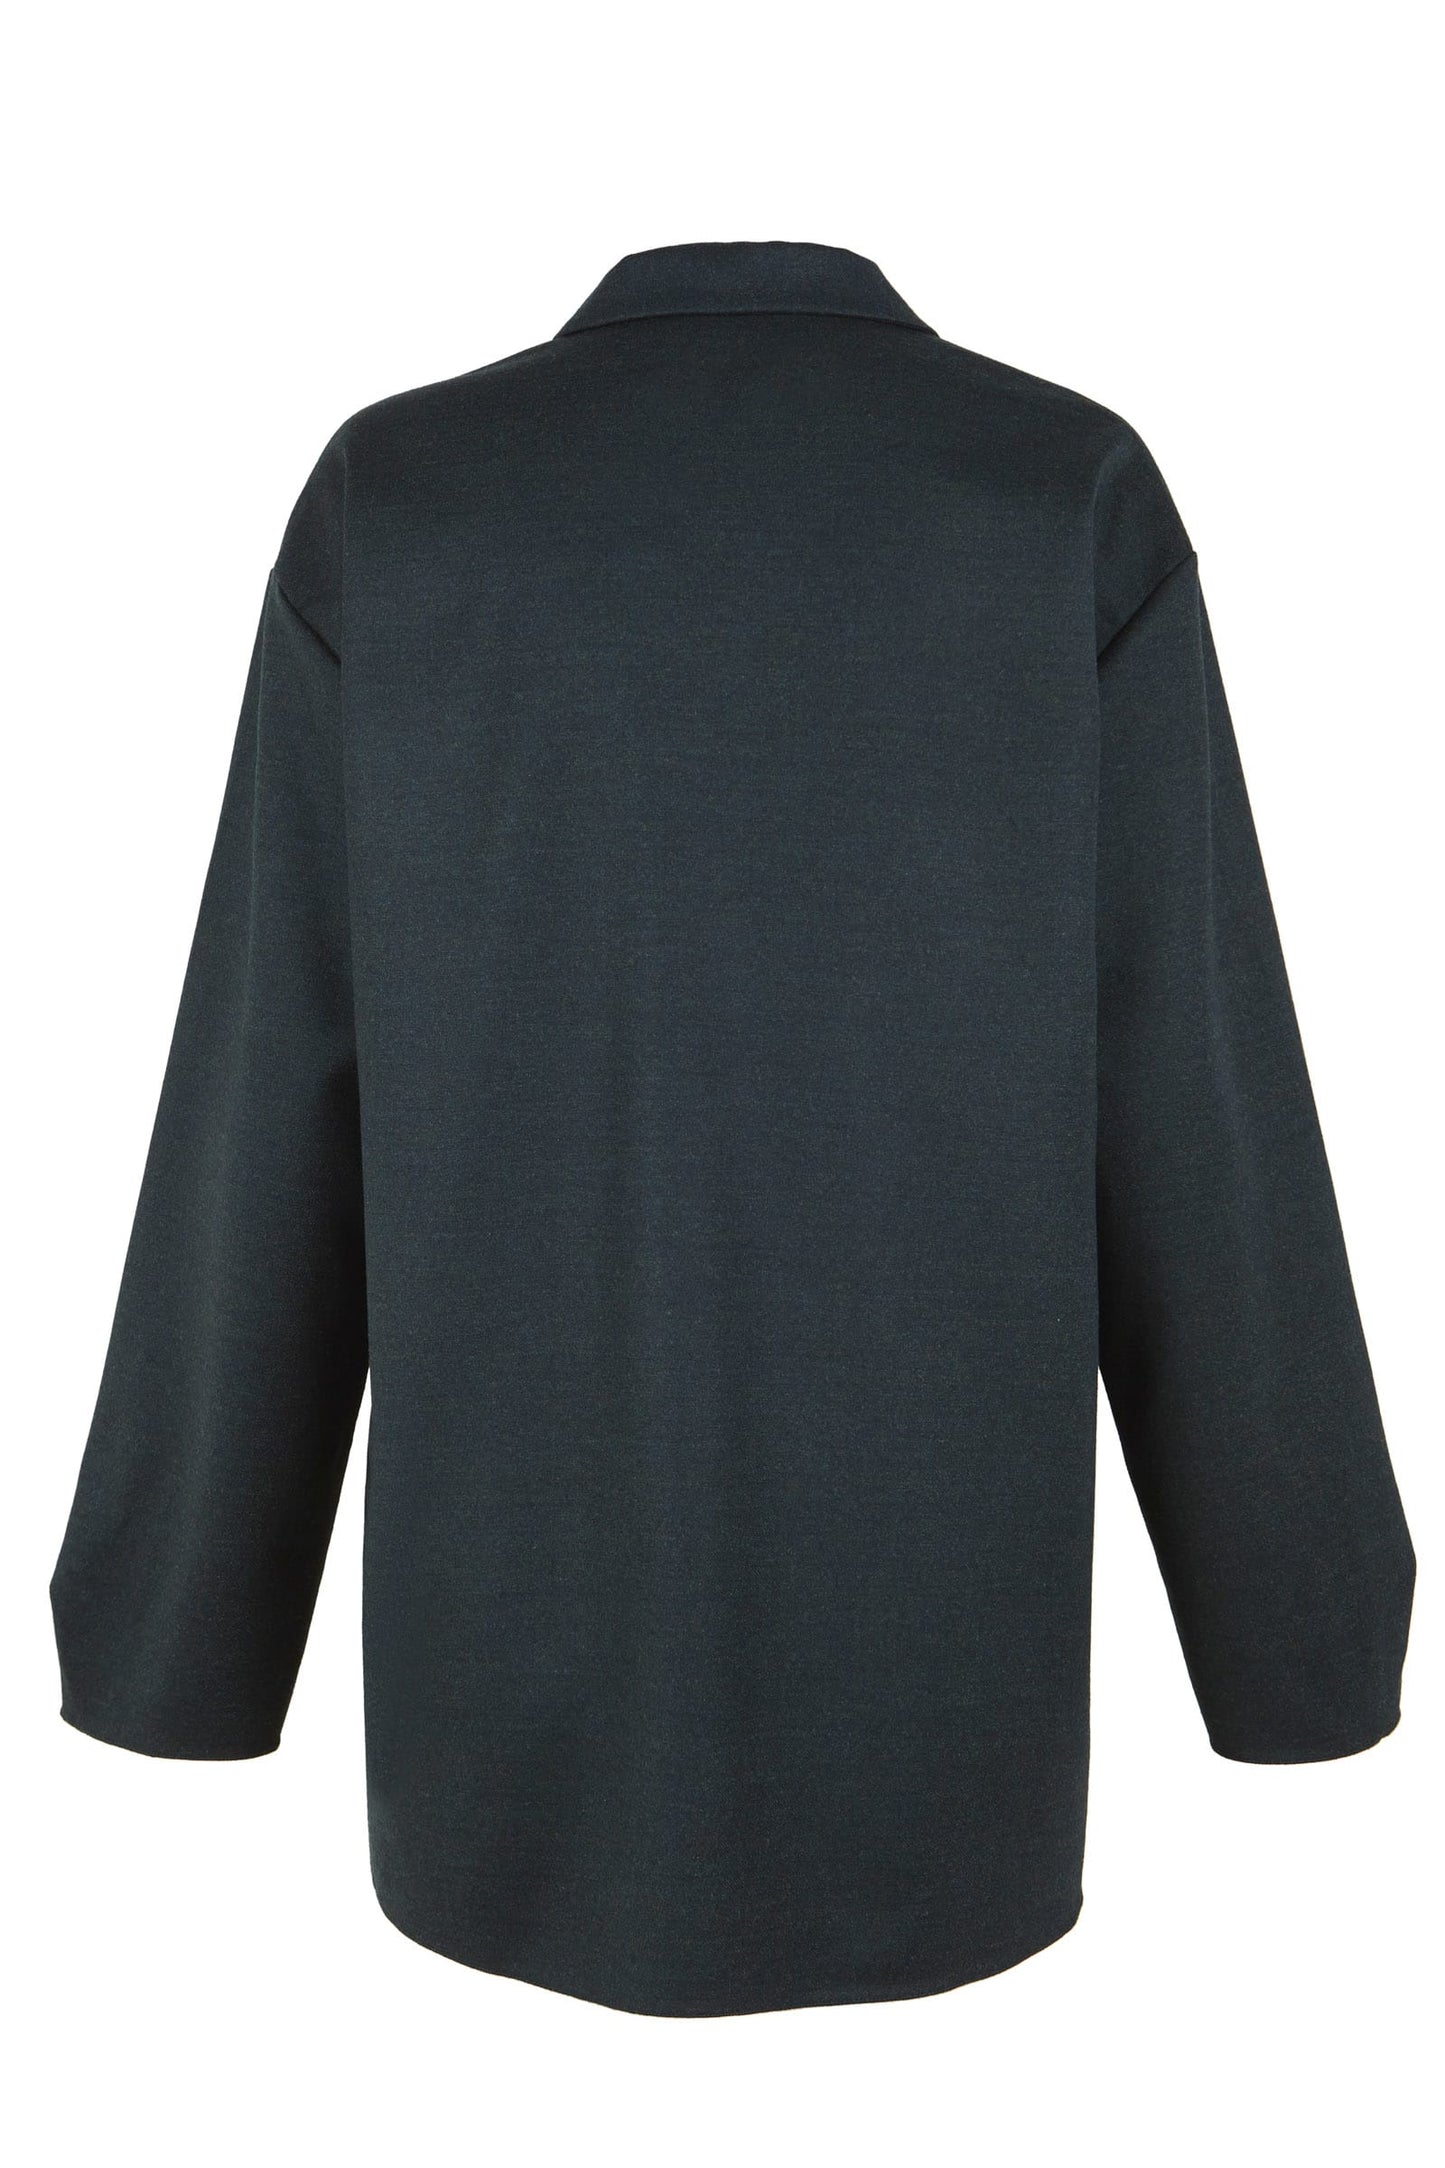 Pencil, wool and pine cashmere top